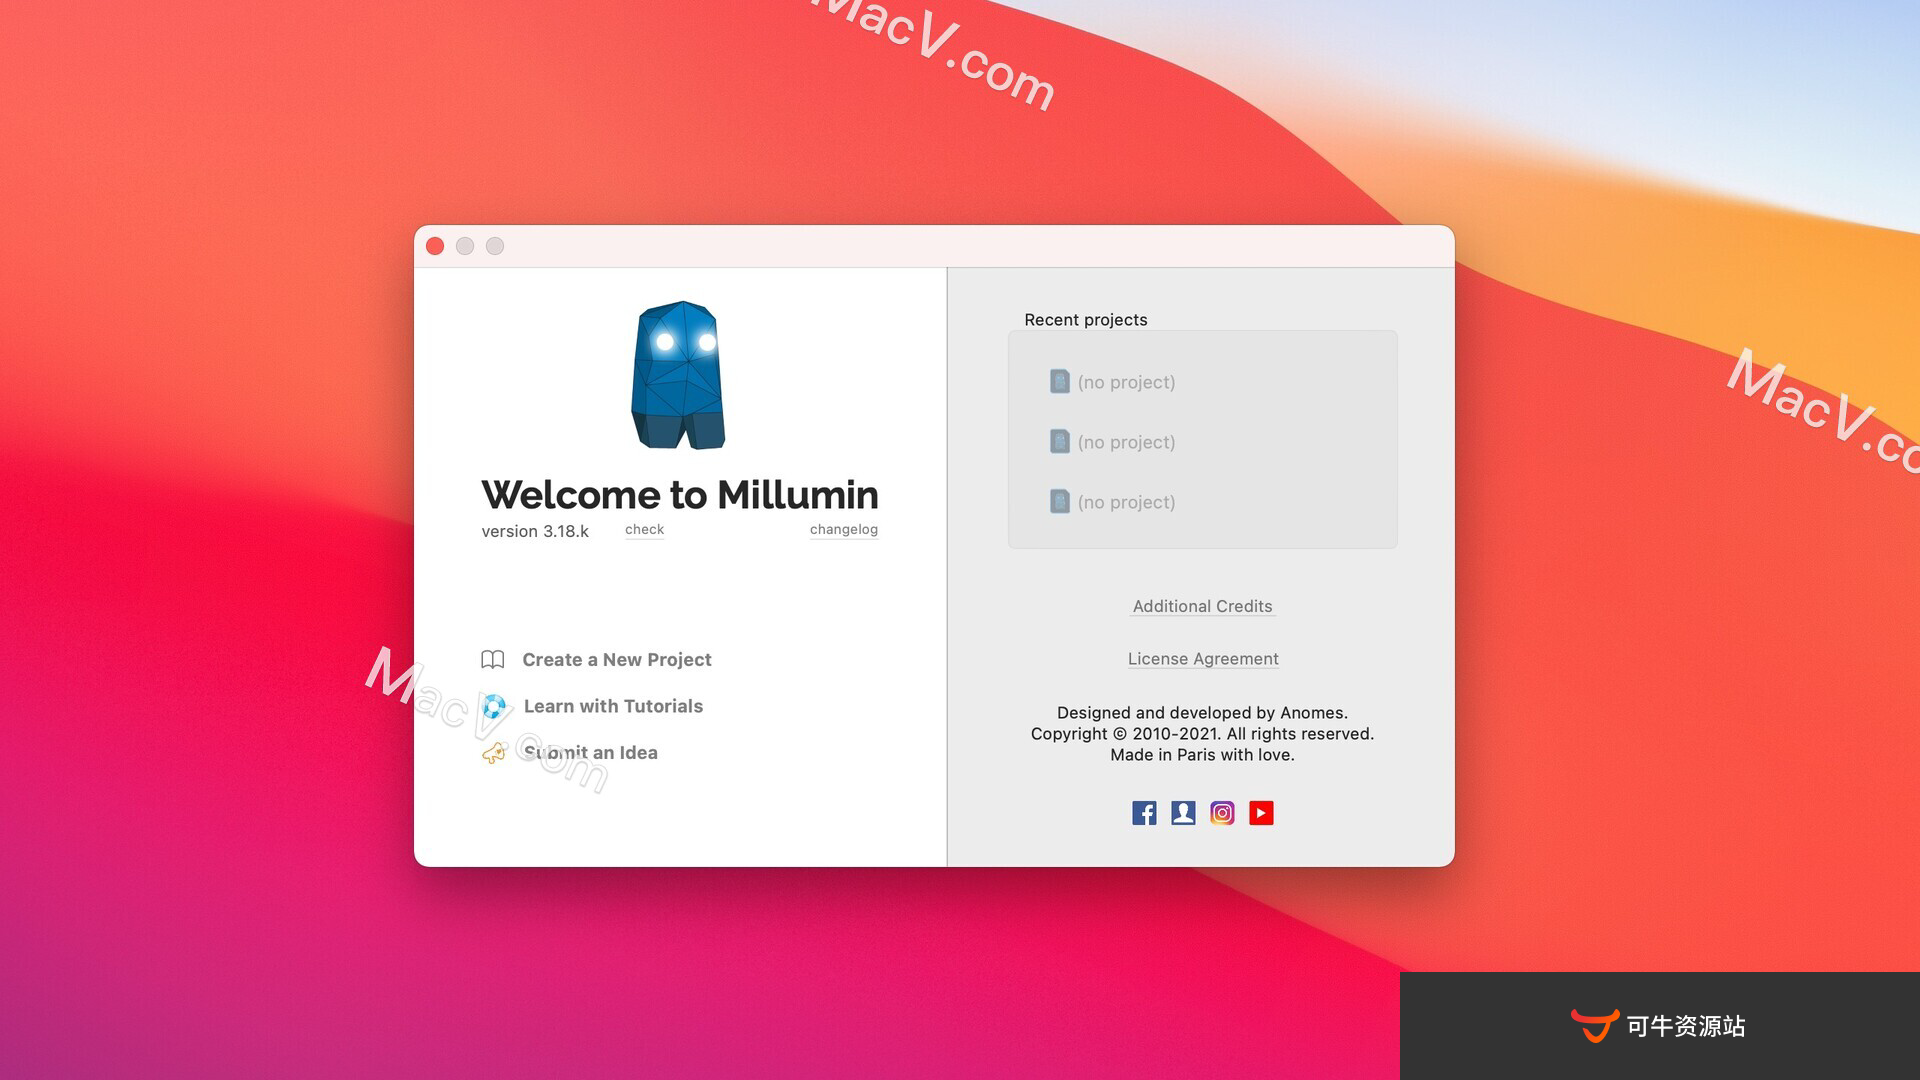 download the last version for apple Millumin 4